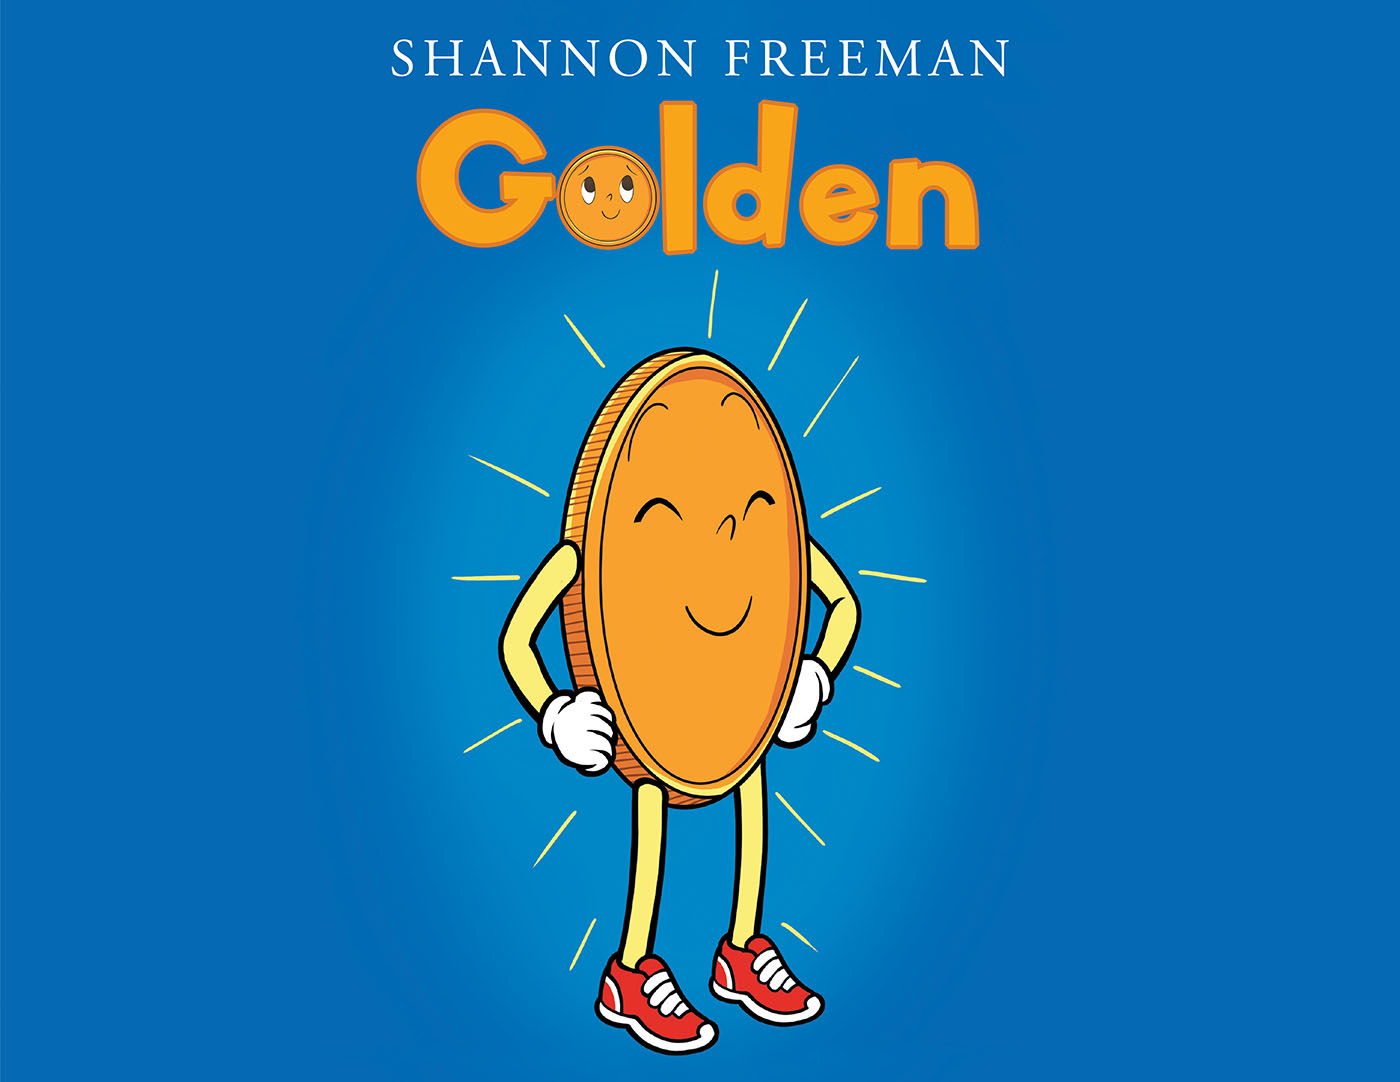 Shannon Freeman’s Newly Released "Golden" is a Sweet Tale of Discovering Where One’s True Value Resonates from